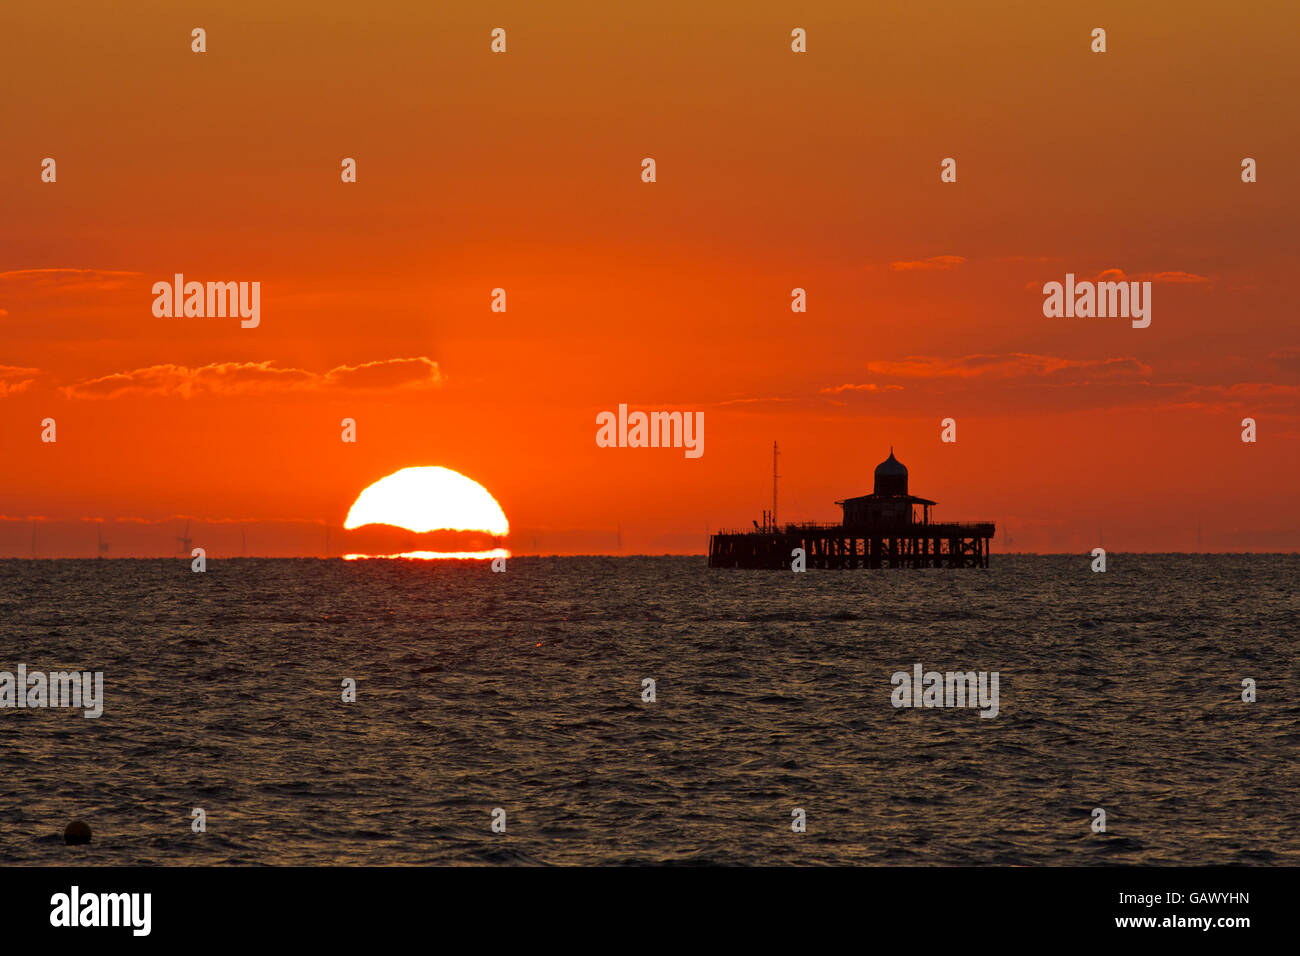 Herne Bay, Kent, UK. 6th July 2016: UK Weather. Sunrise gives the sky a red-orange glow over the remains of Herne Bay pier, which was so badly damaged by storms in 1978 that the central section was dismantled. The London array, the largest offshore windfarm in the world is seen through the heat haze. Temperatures could reach into the mid 20s at the weekend as hot air from the continent covers the south of the country Credit:  Alan Payton/Alamy Live News Stock Photo